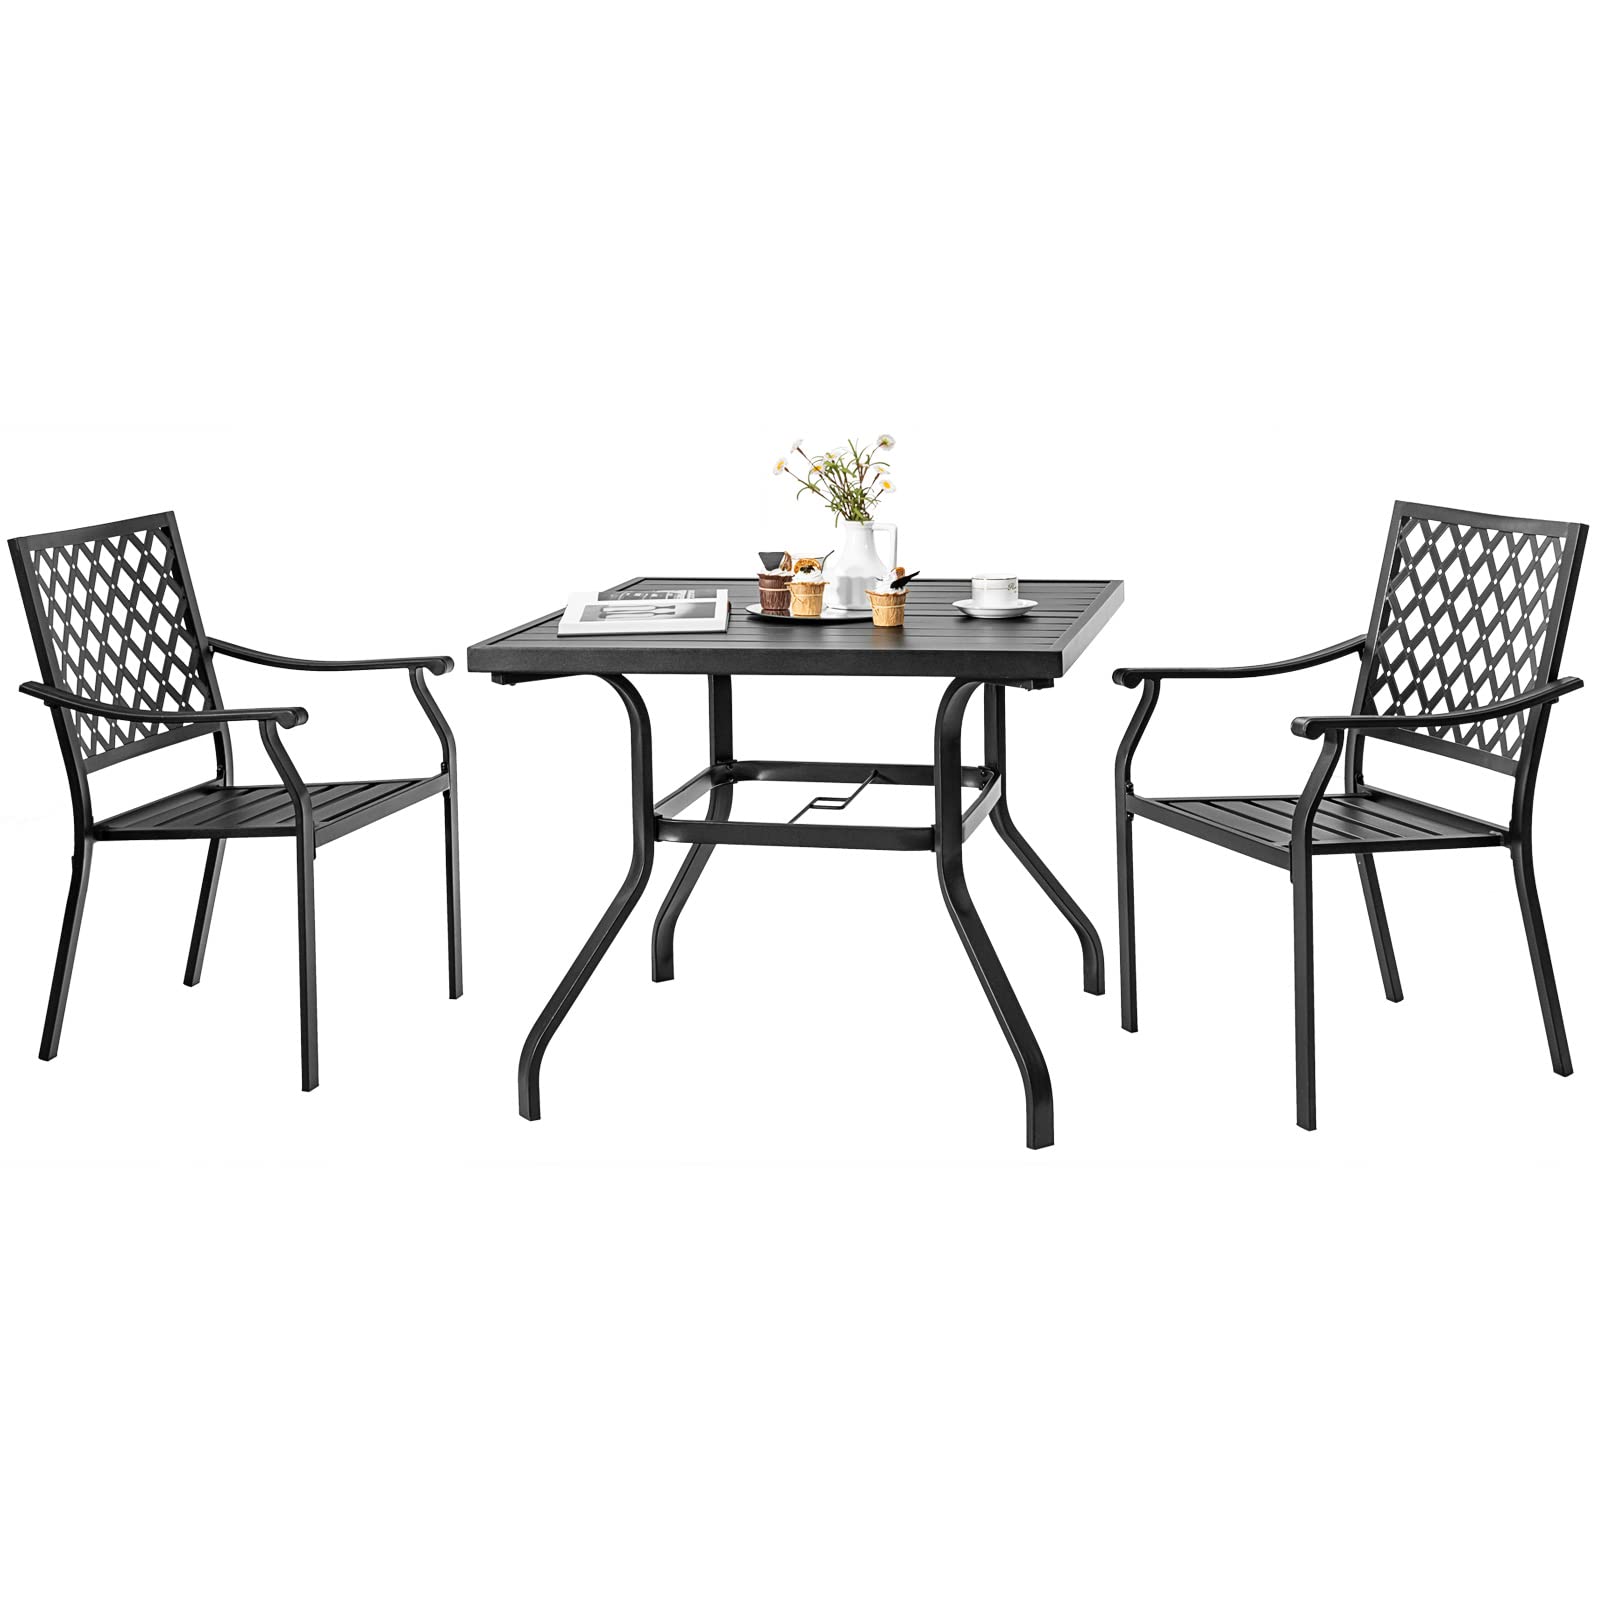 Giantex 3 Pieces Outdoor Dining Set, Patio Table & 2 Stackable Chairs, Outside Dining Furniture